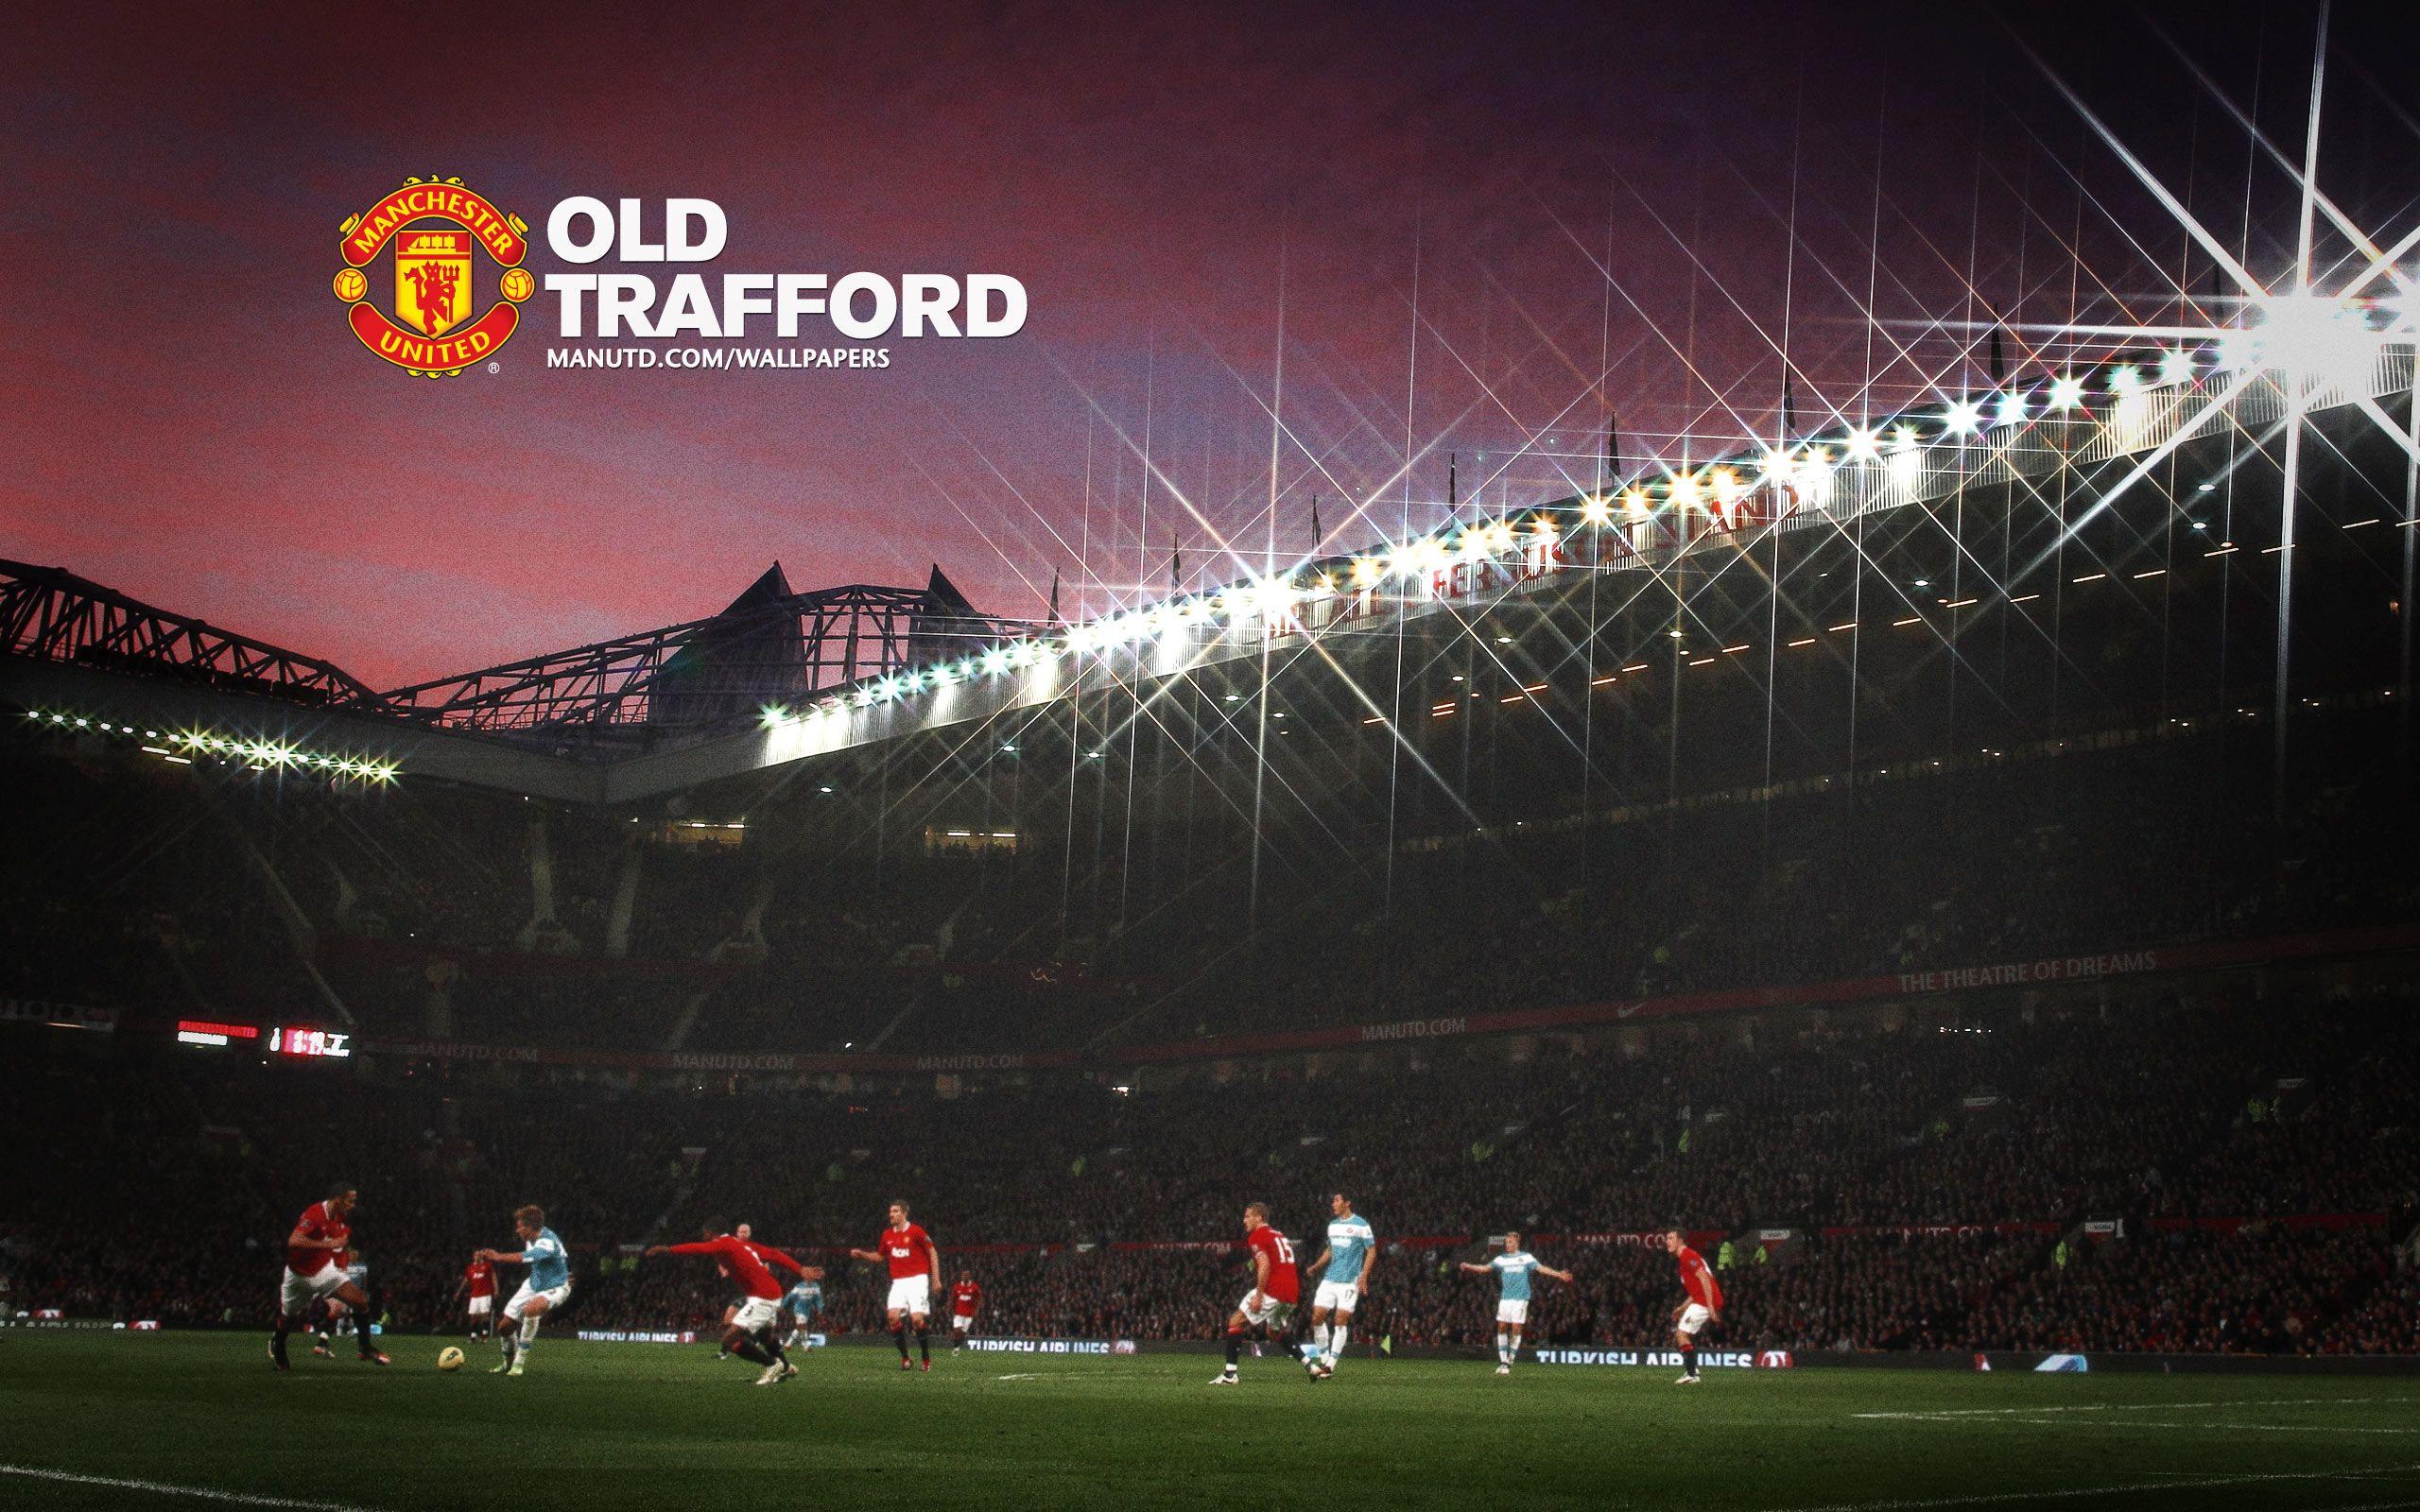 Old Trafford Hd Wallpapers - Wallpaper Cave